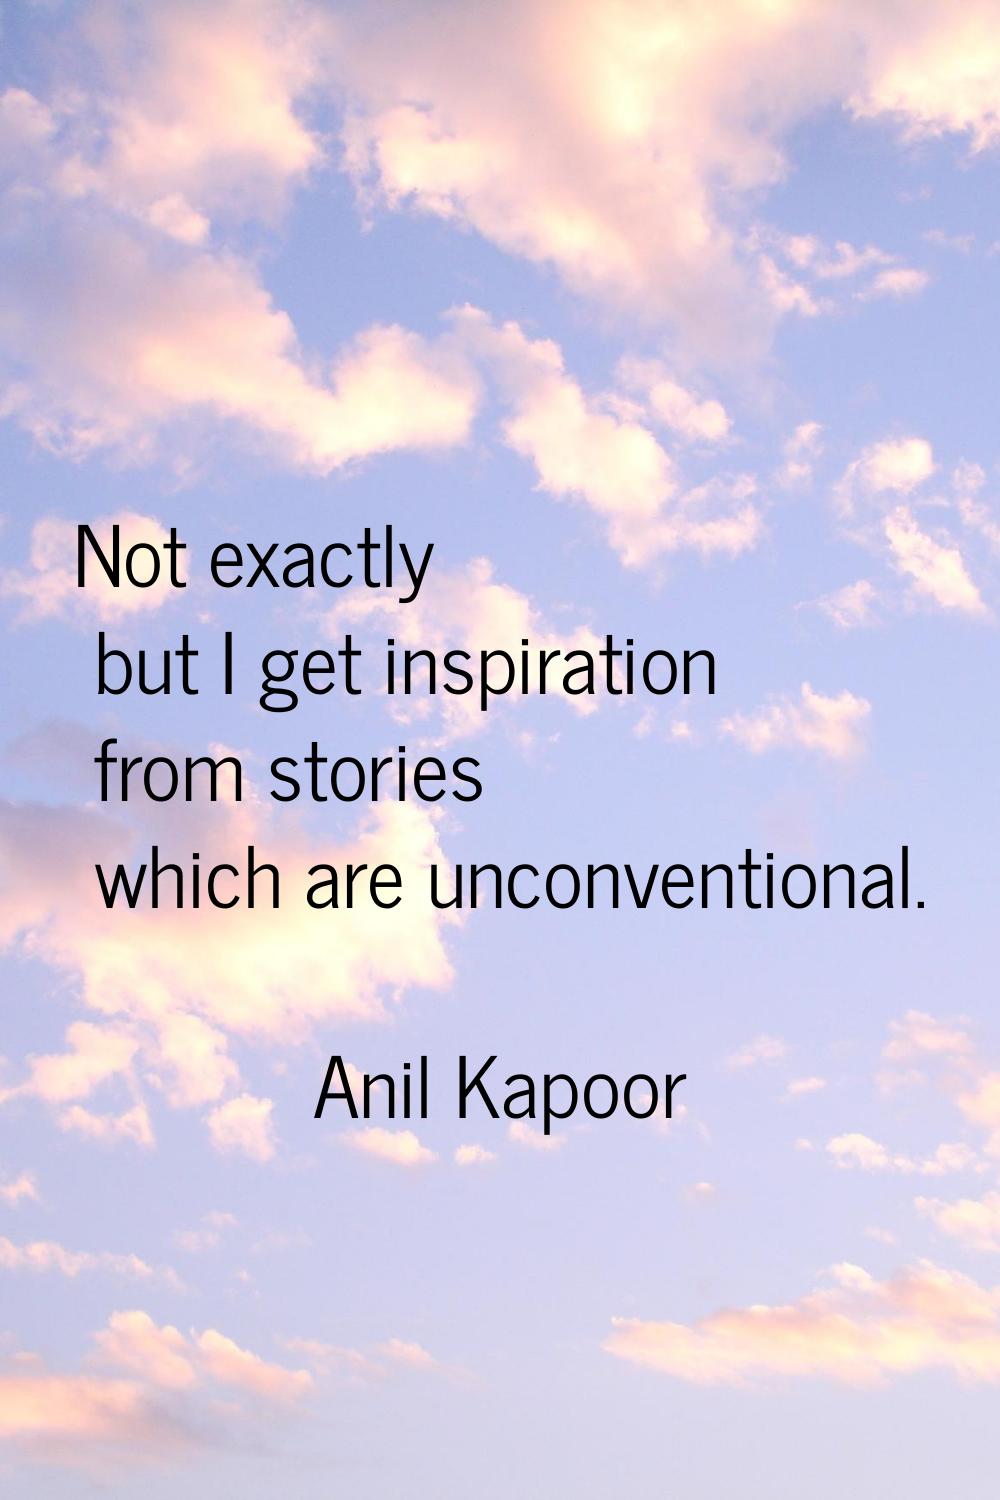 Not exactly but I get inspiration from stories which are unconventional.